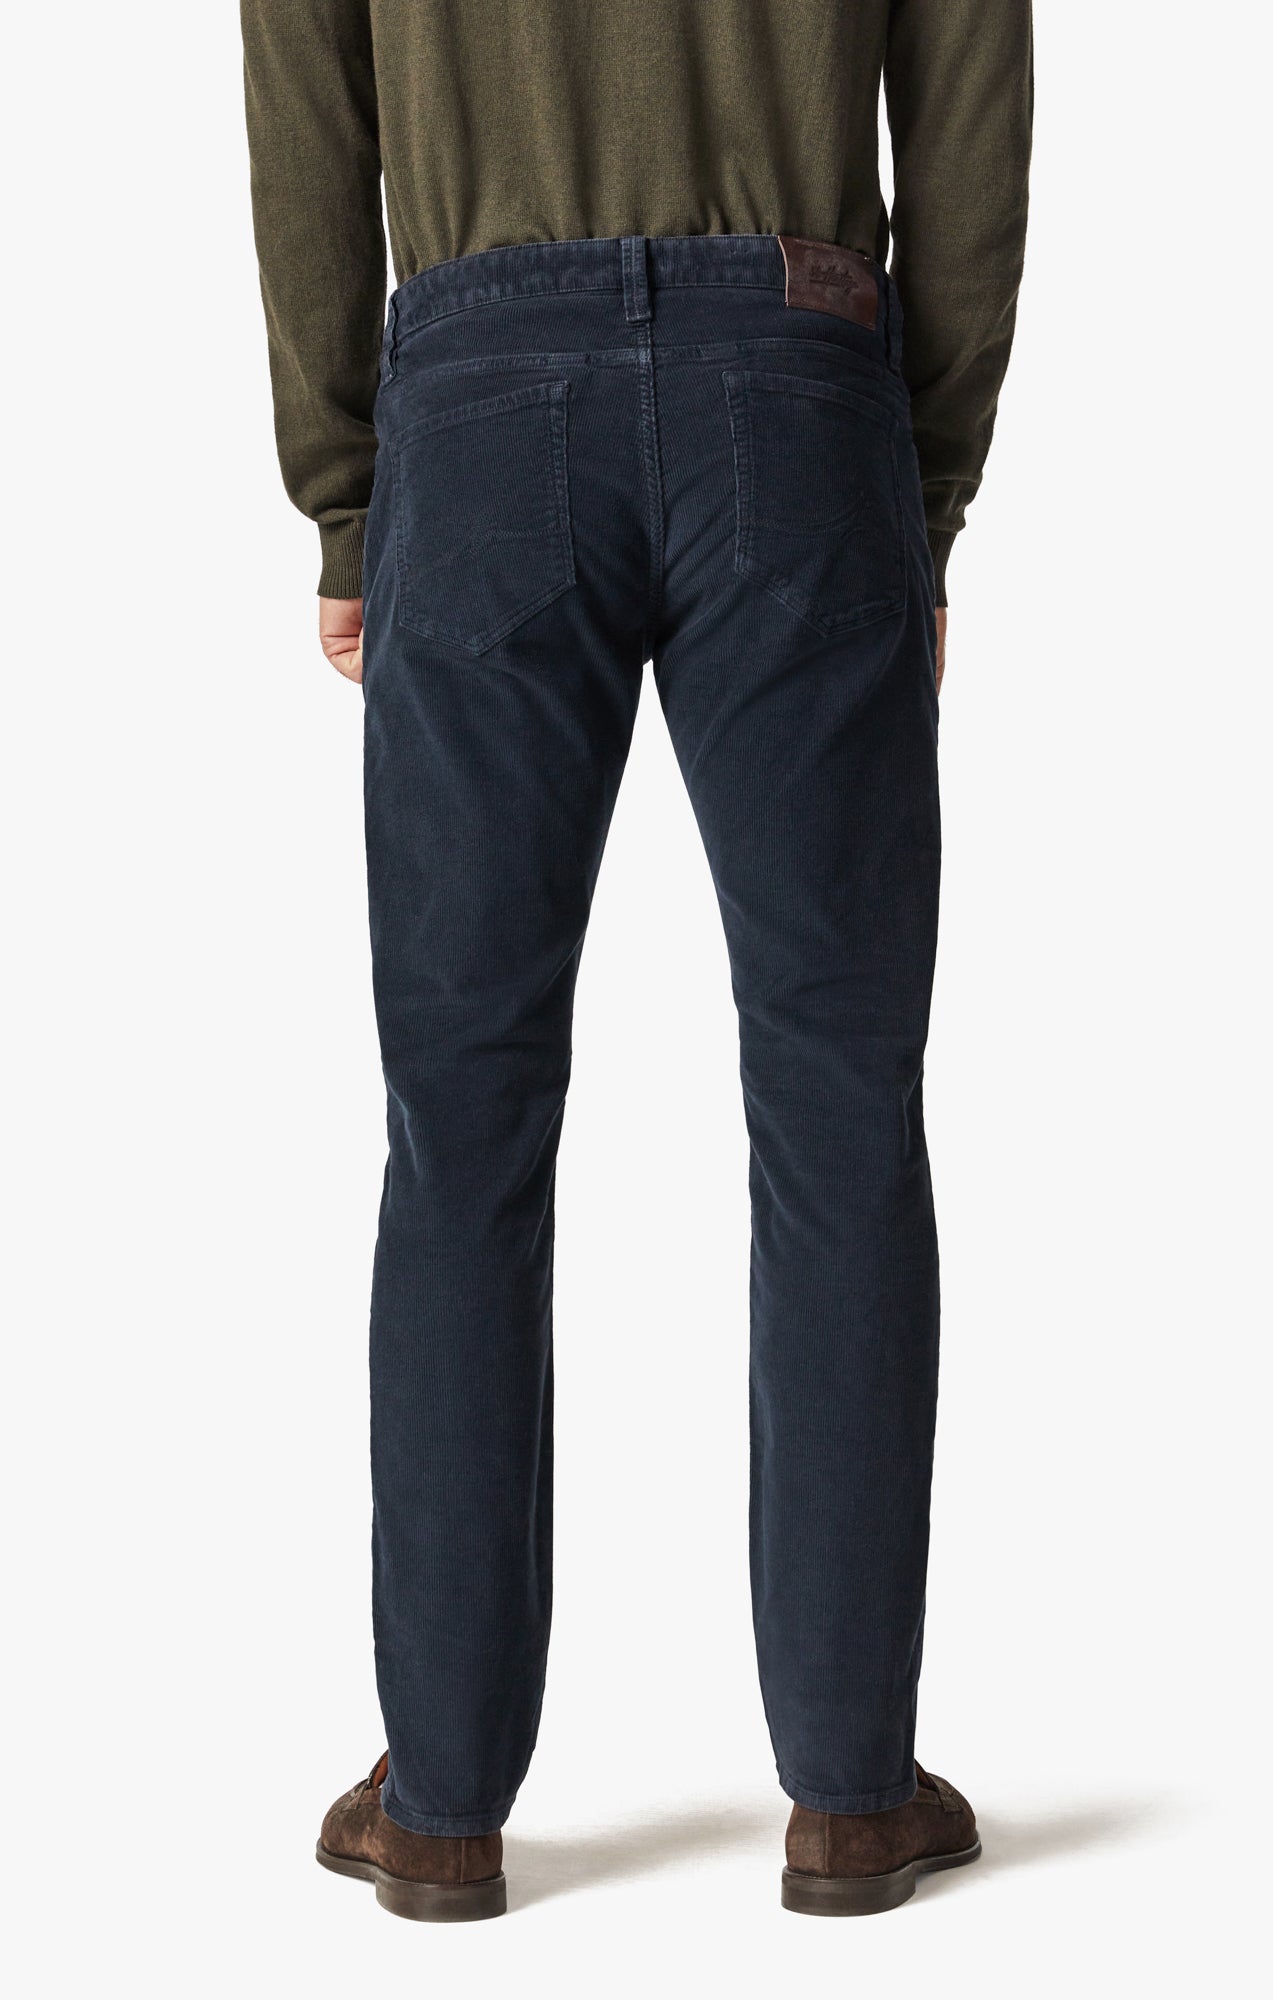 Cool Tapered Leg Pants In Navy Cord